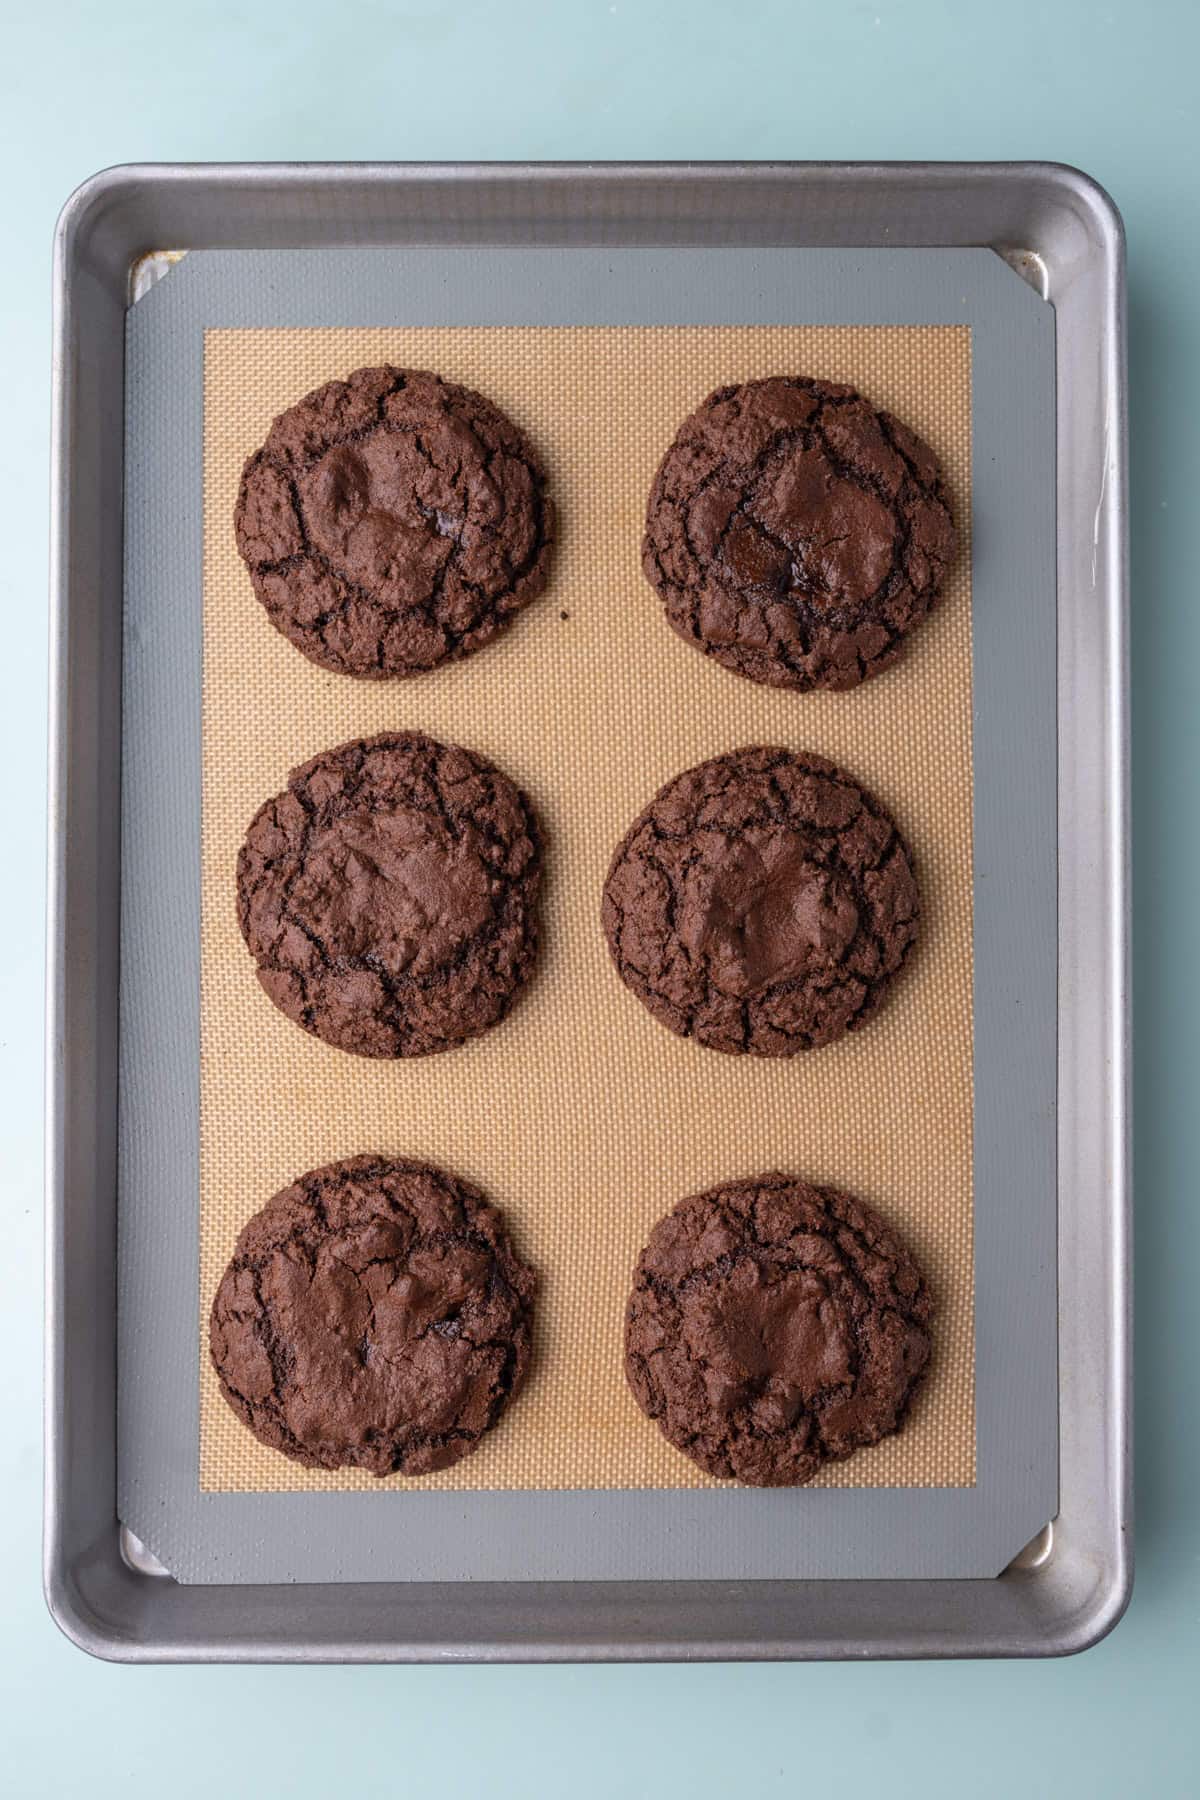 Chocolate fudge cookies fresh out of the oven still on the baking tray. 